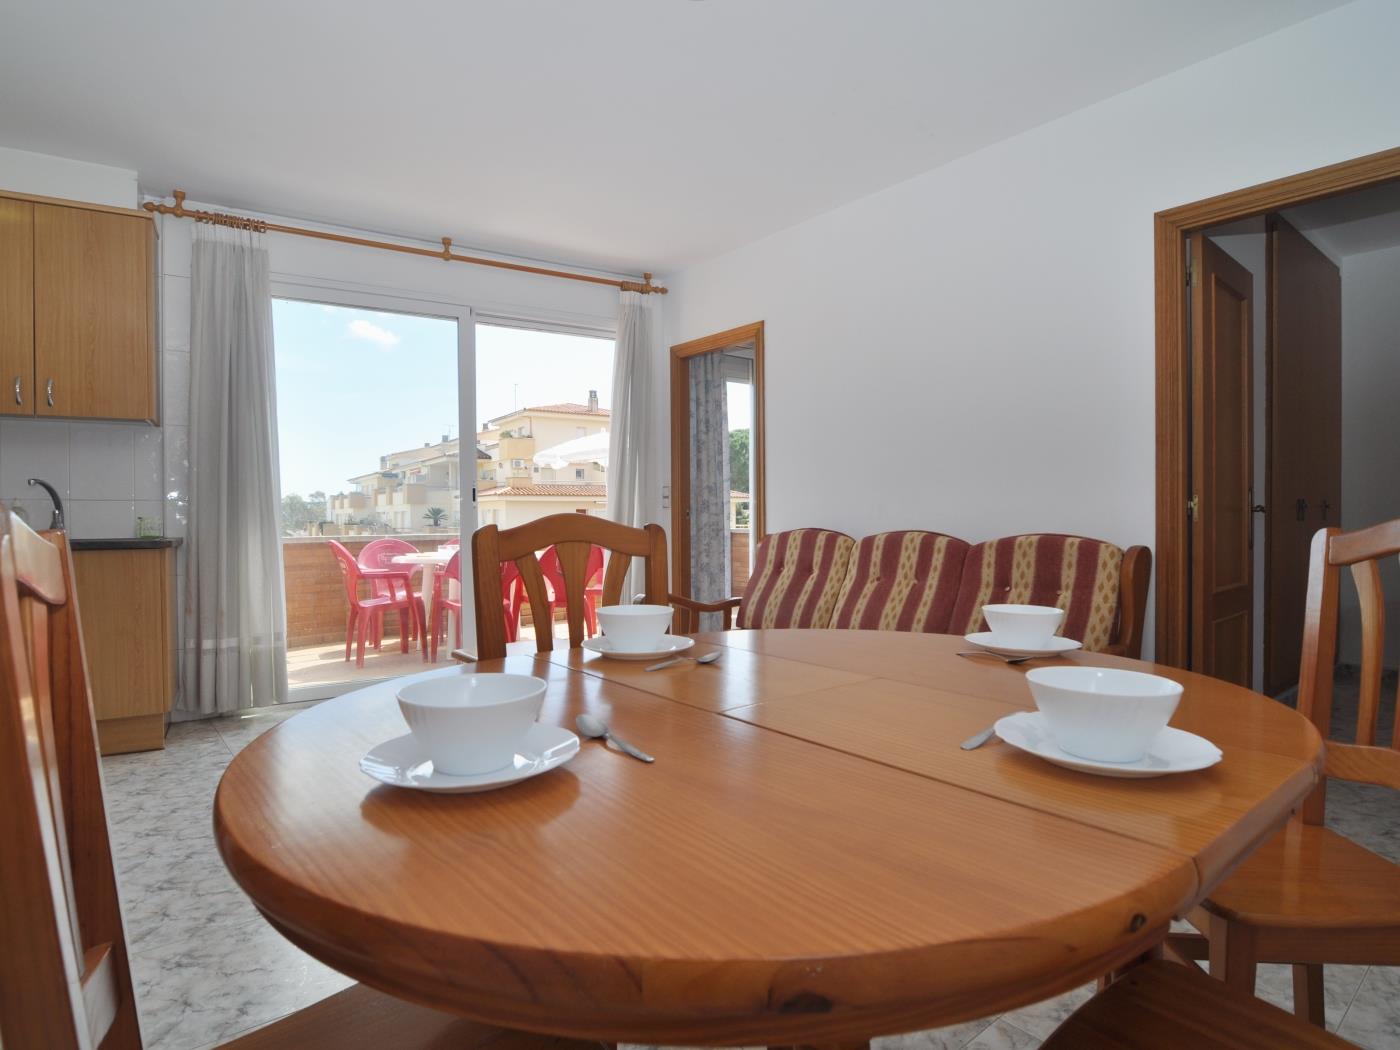 APARTMENT WITH POOL 2 MINUTES, ON FOOT, FROM THE BEACH. in l'Escala